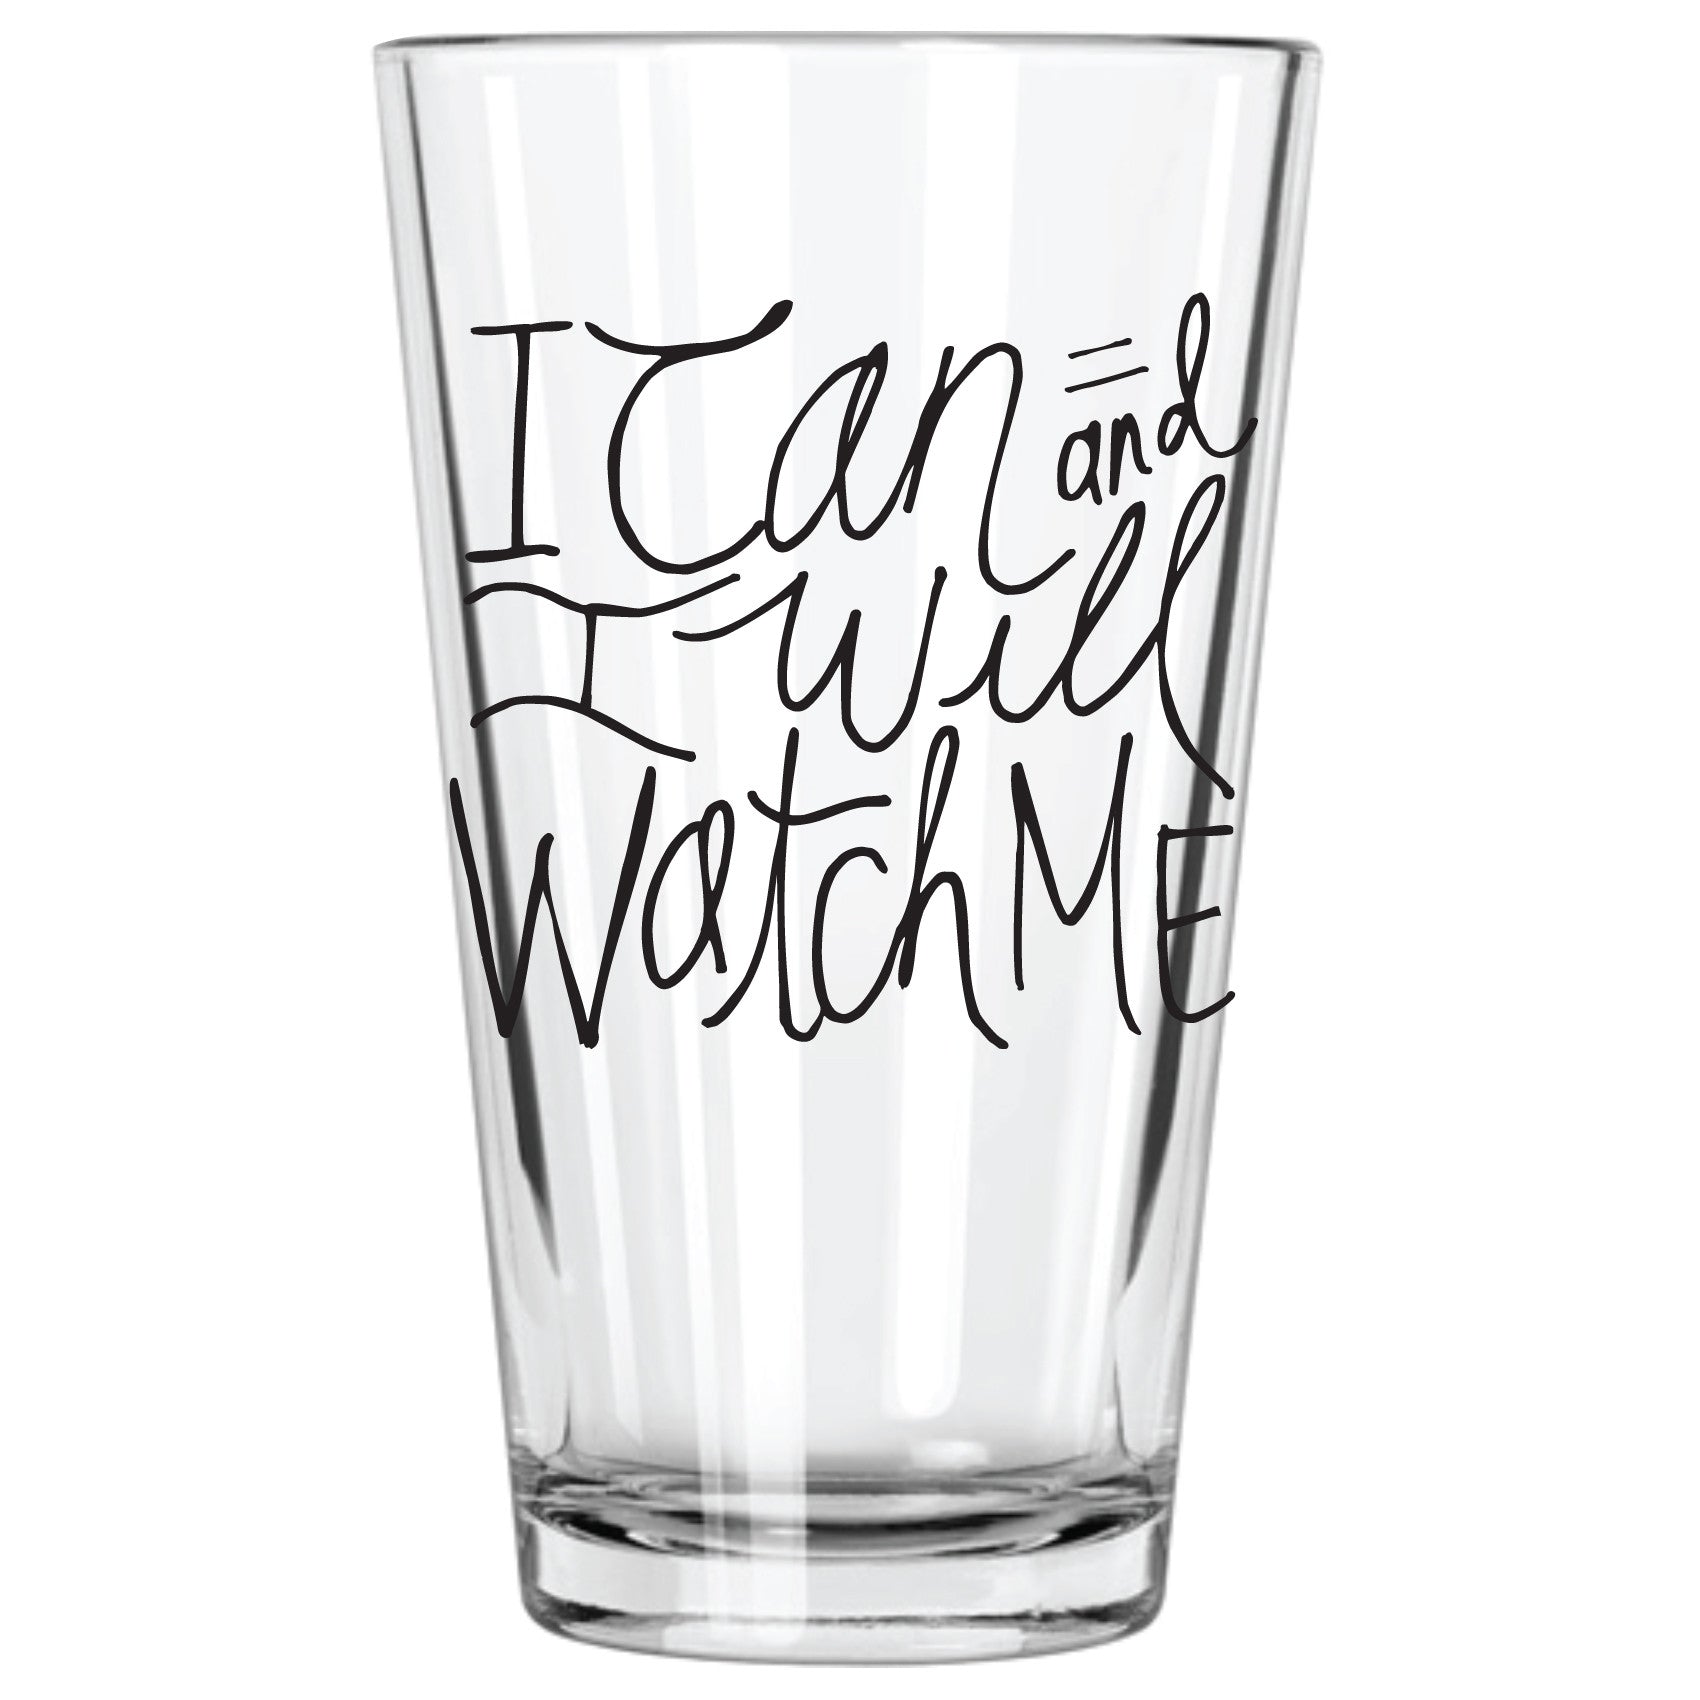 I Can and I Will.  Watch Me. Pint Glass - Northern Glasses Pint Glass